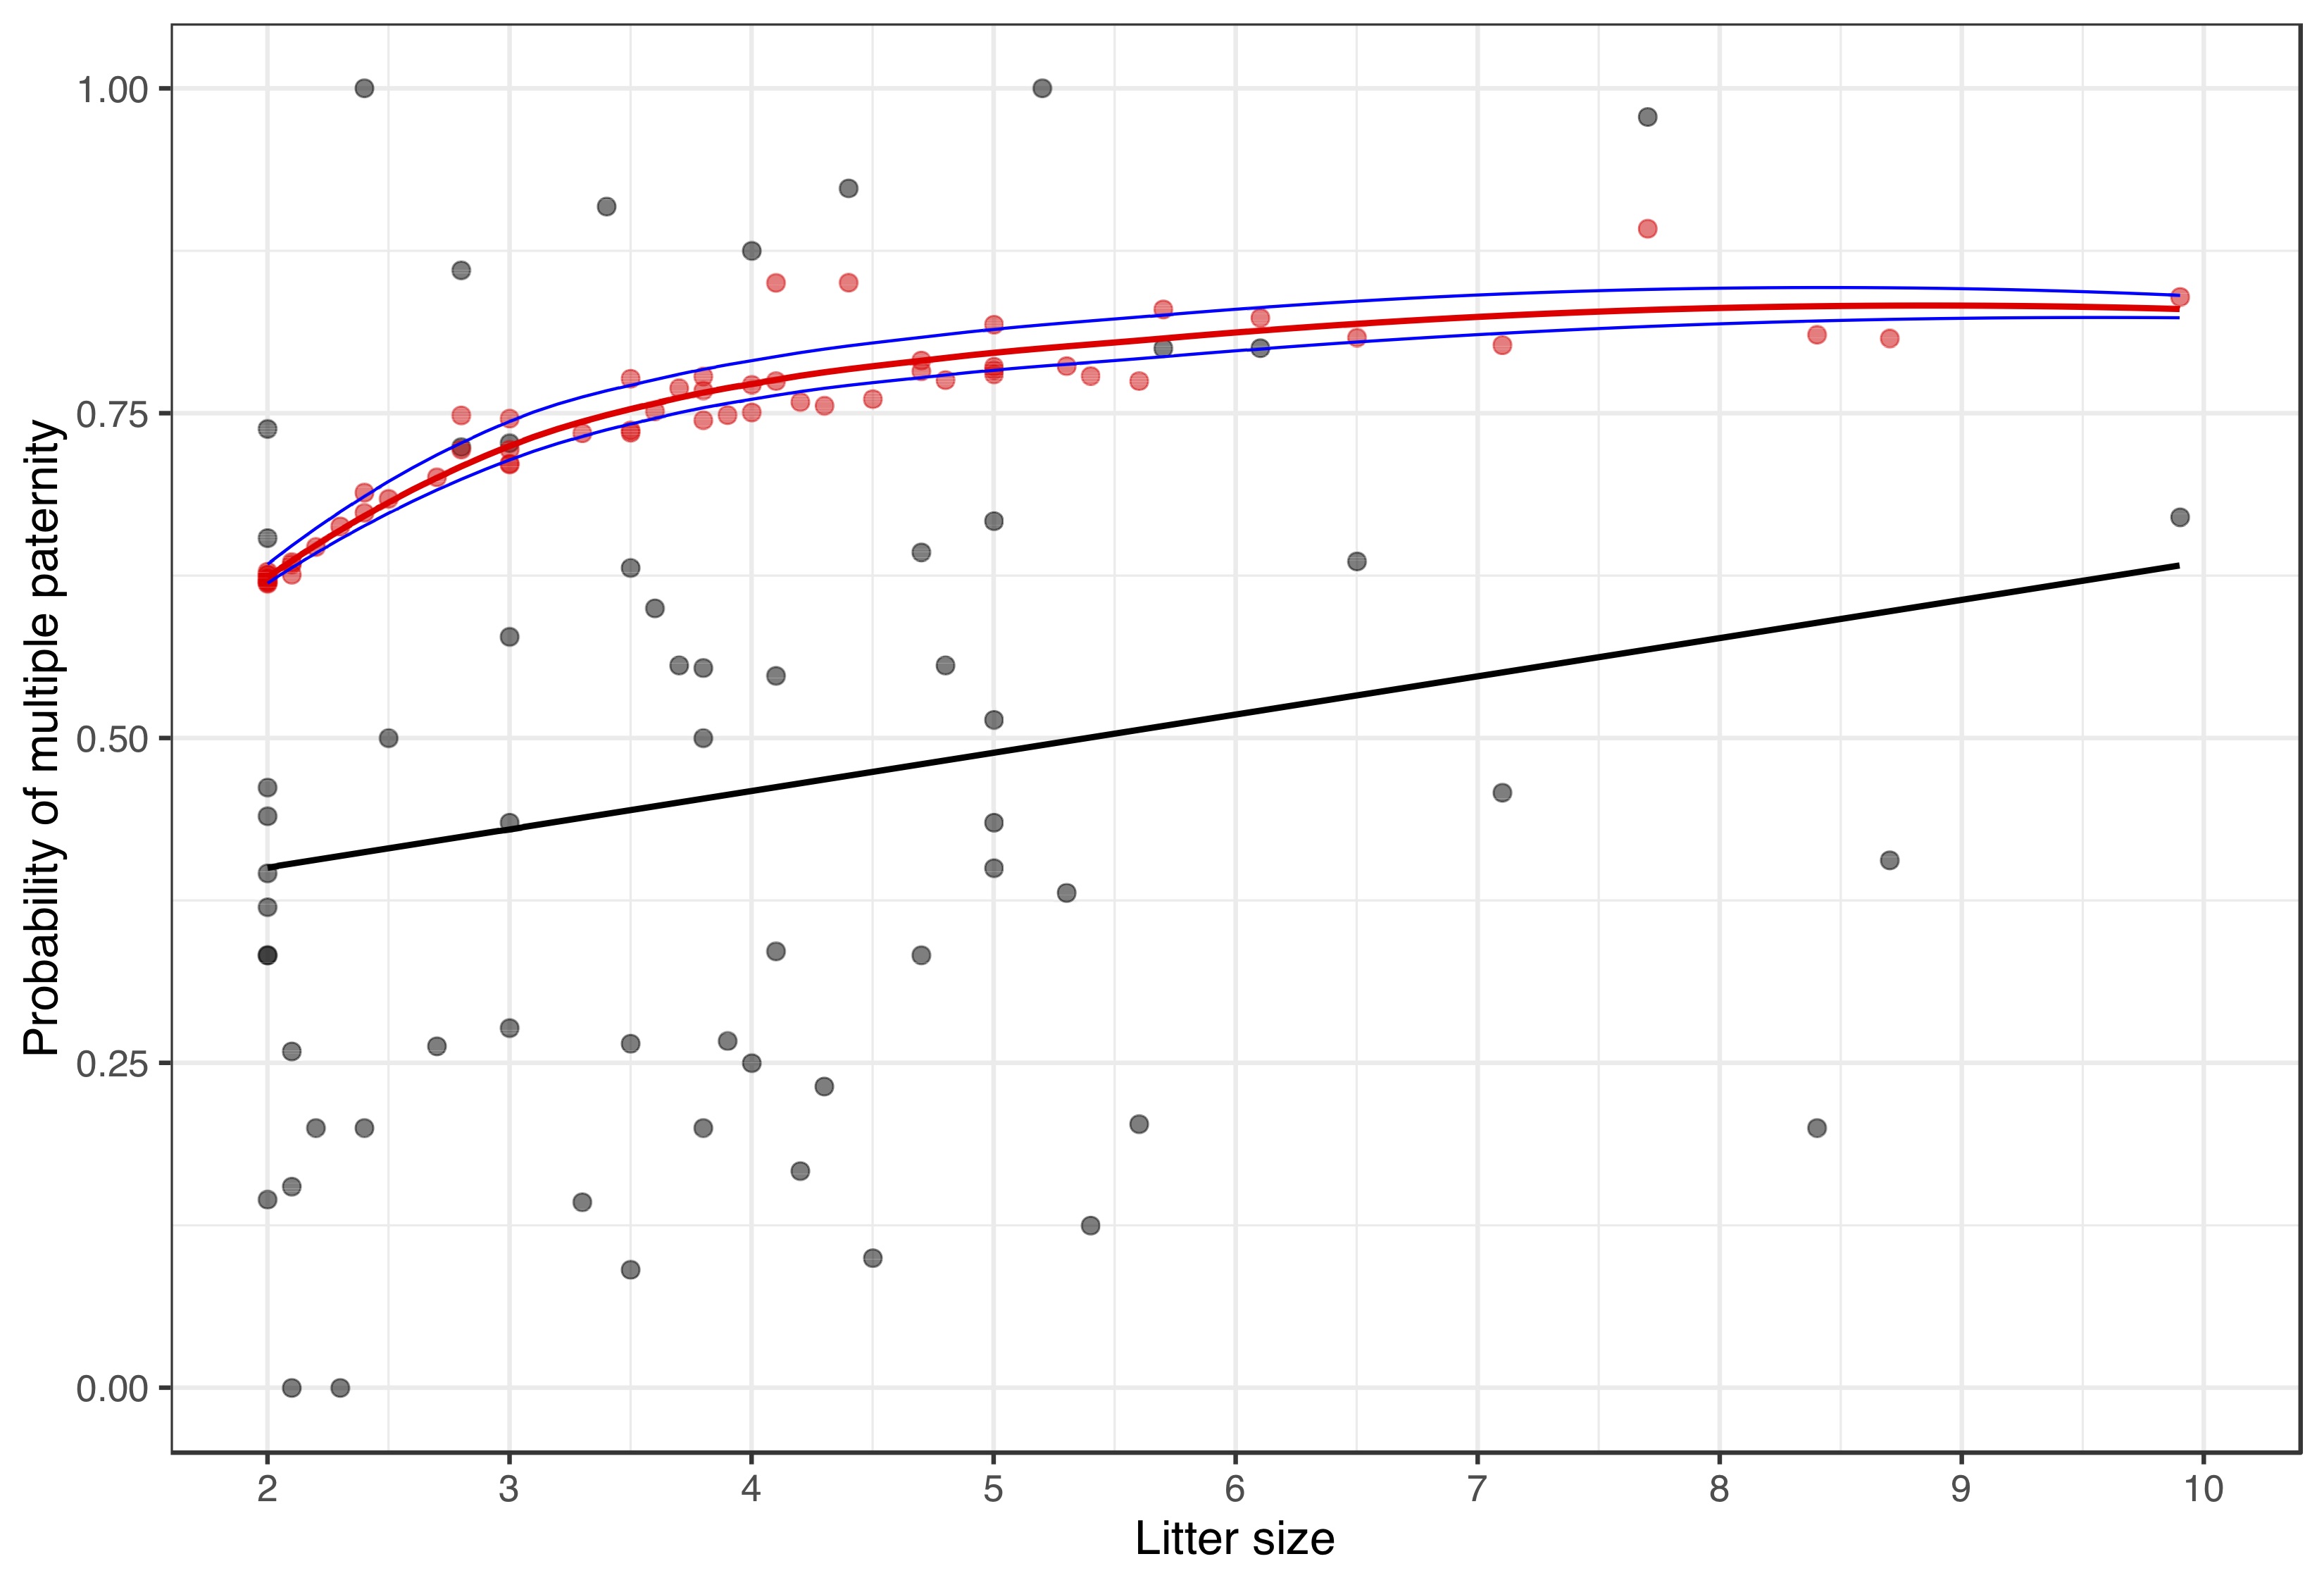 Estimated frequency of multiple paternity across litter sizes ranging from 2 to 10 for mammals